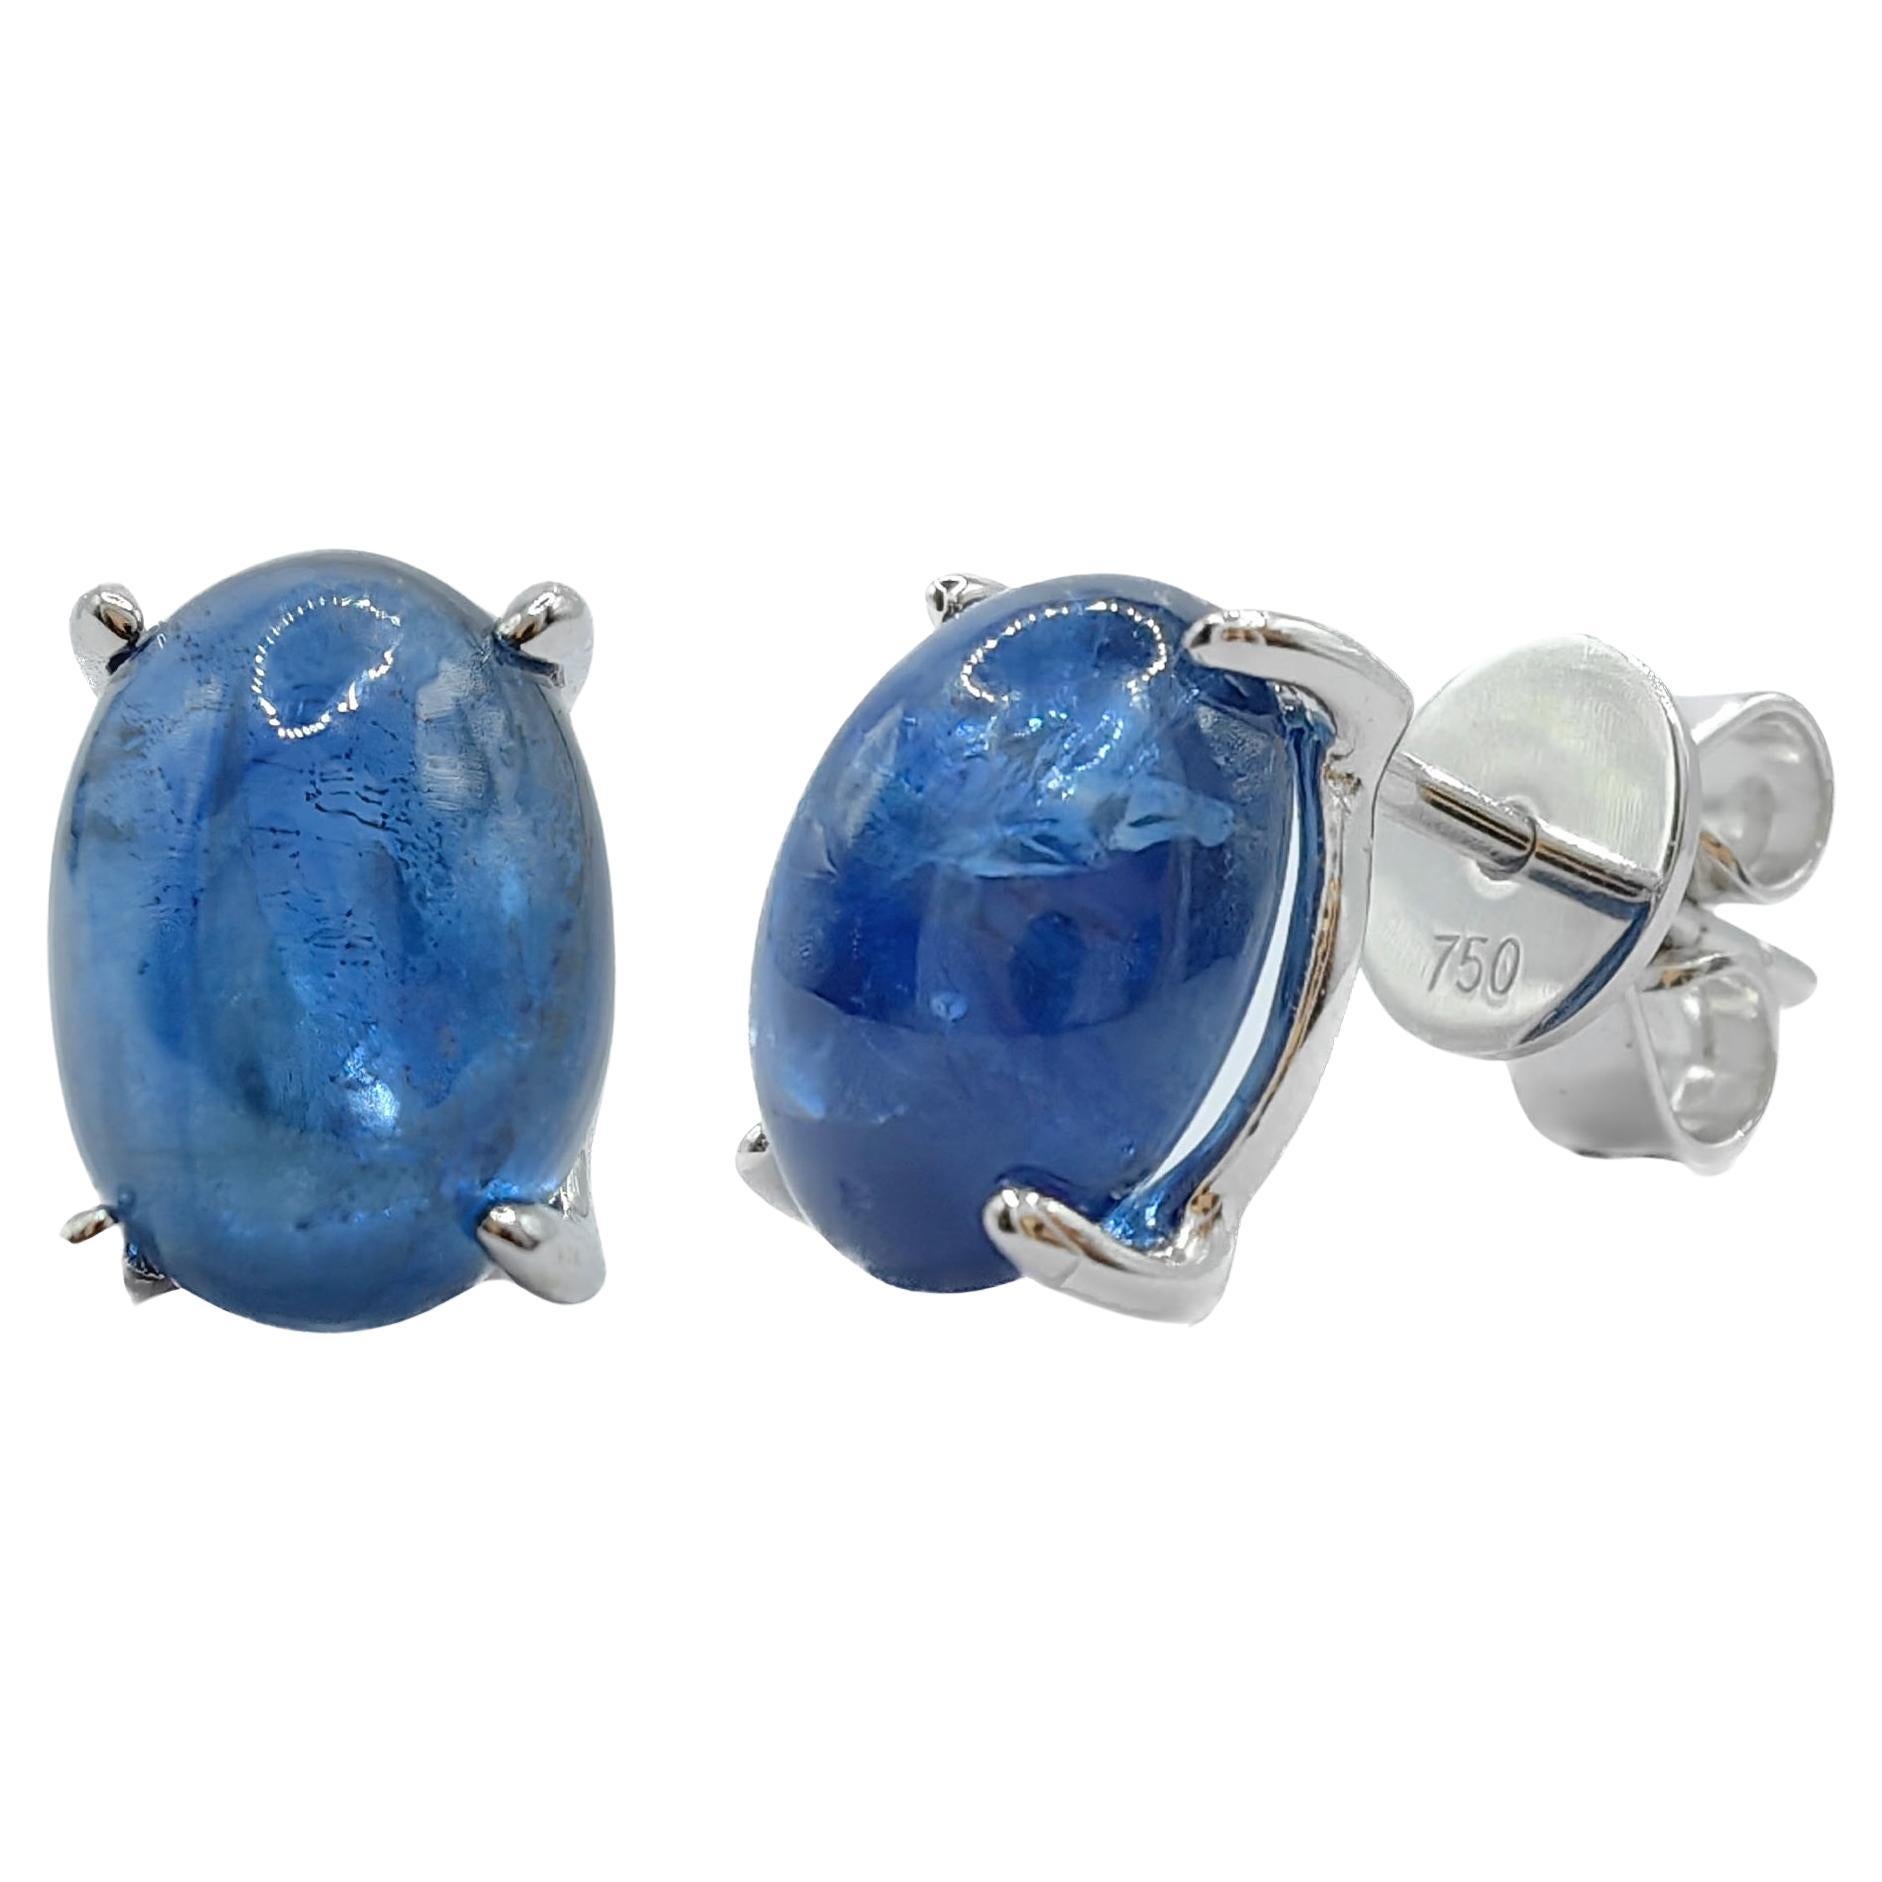 Matched 4.67 Carat 8x6mm Cabochon Blue Sapphire Stud Earrings in 18K White Gold